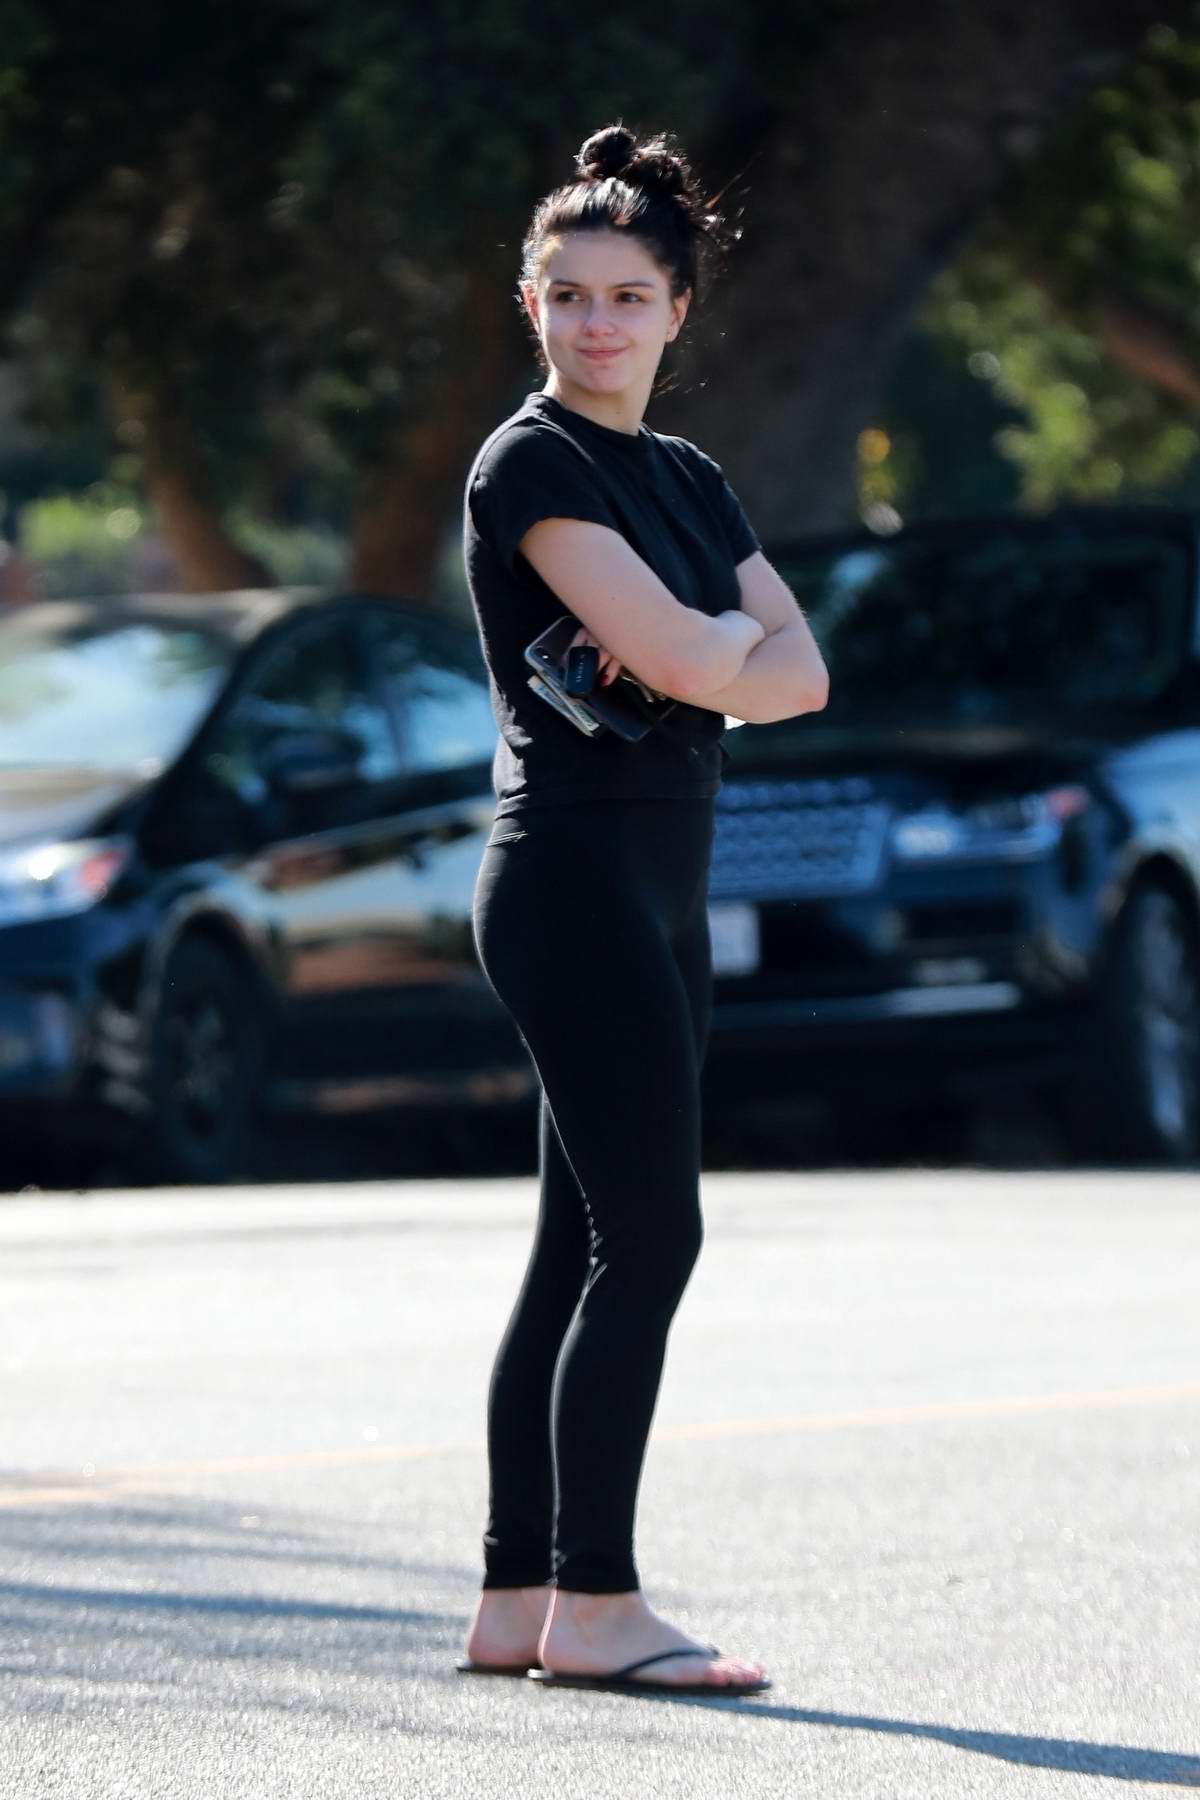 Ariel Winter keeps it casual in a black tee and leggings while